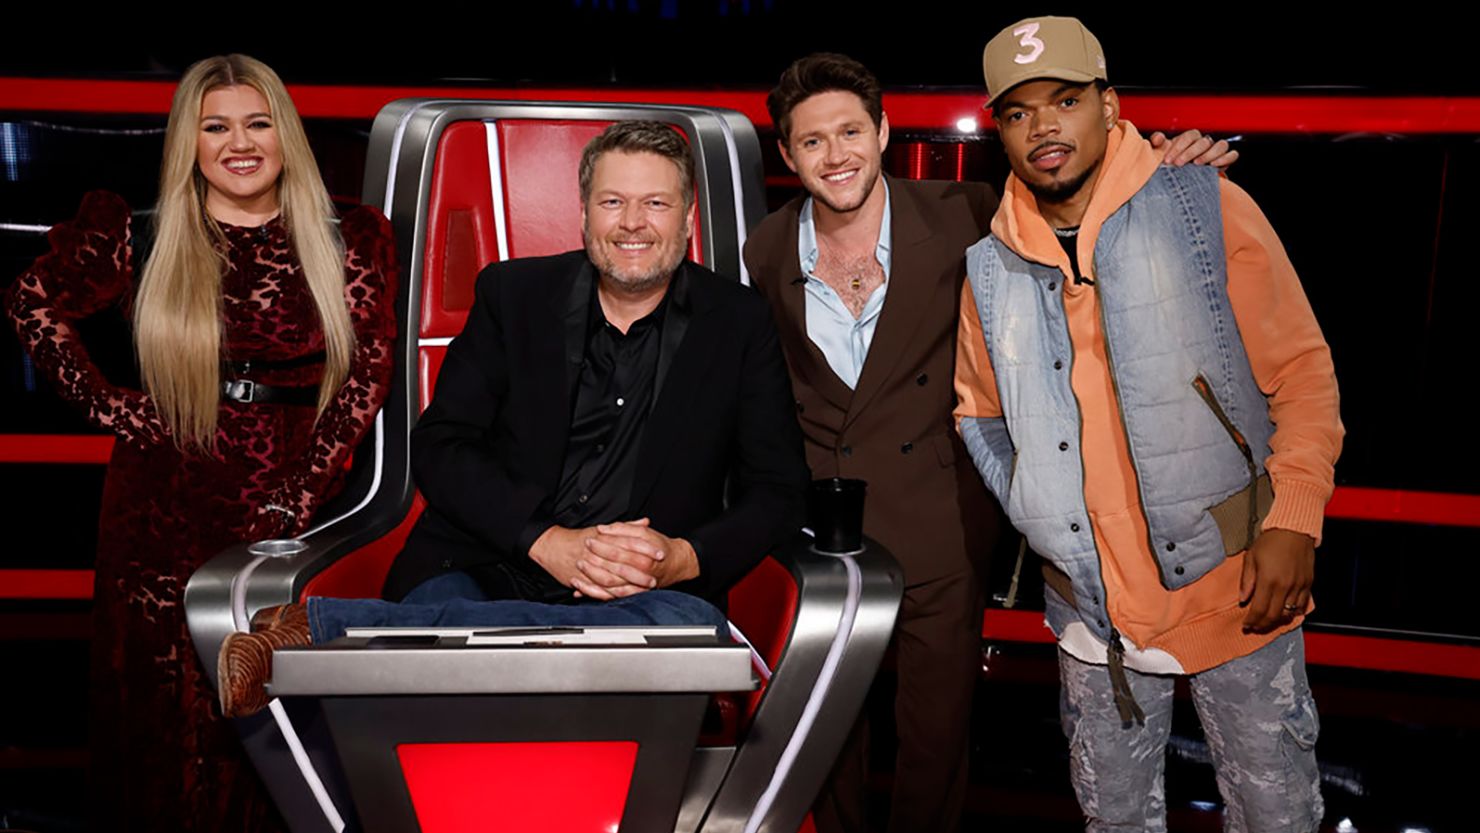 Kelly Clarkson, Blake Shelton, Niall Horan, and Chance The Rapper